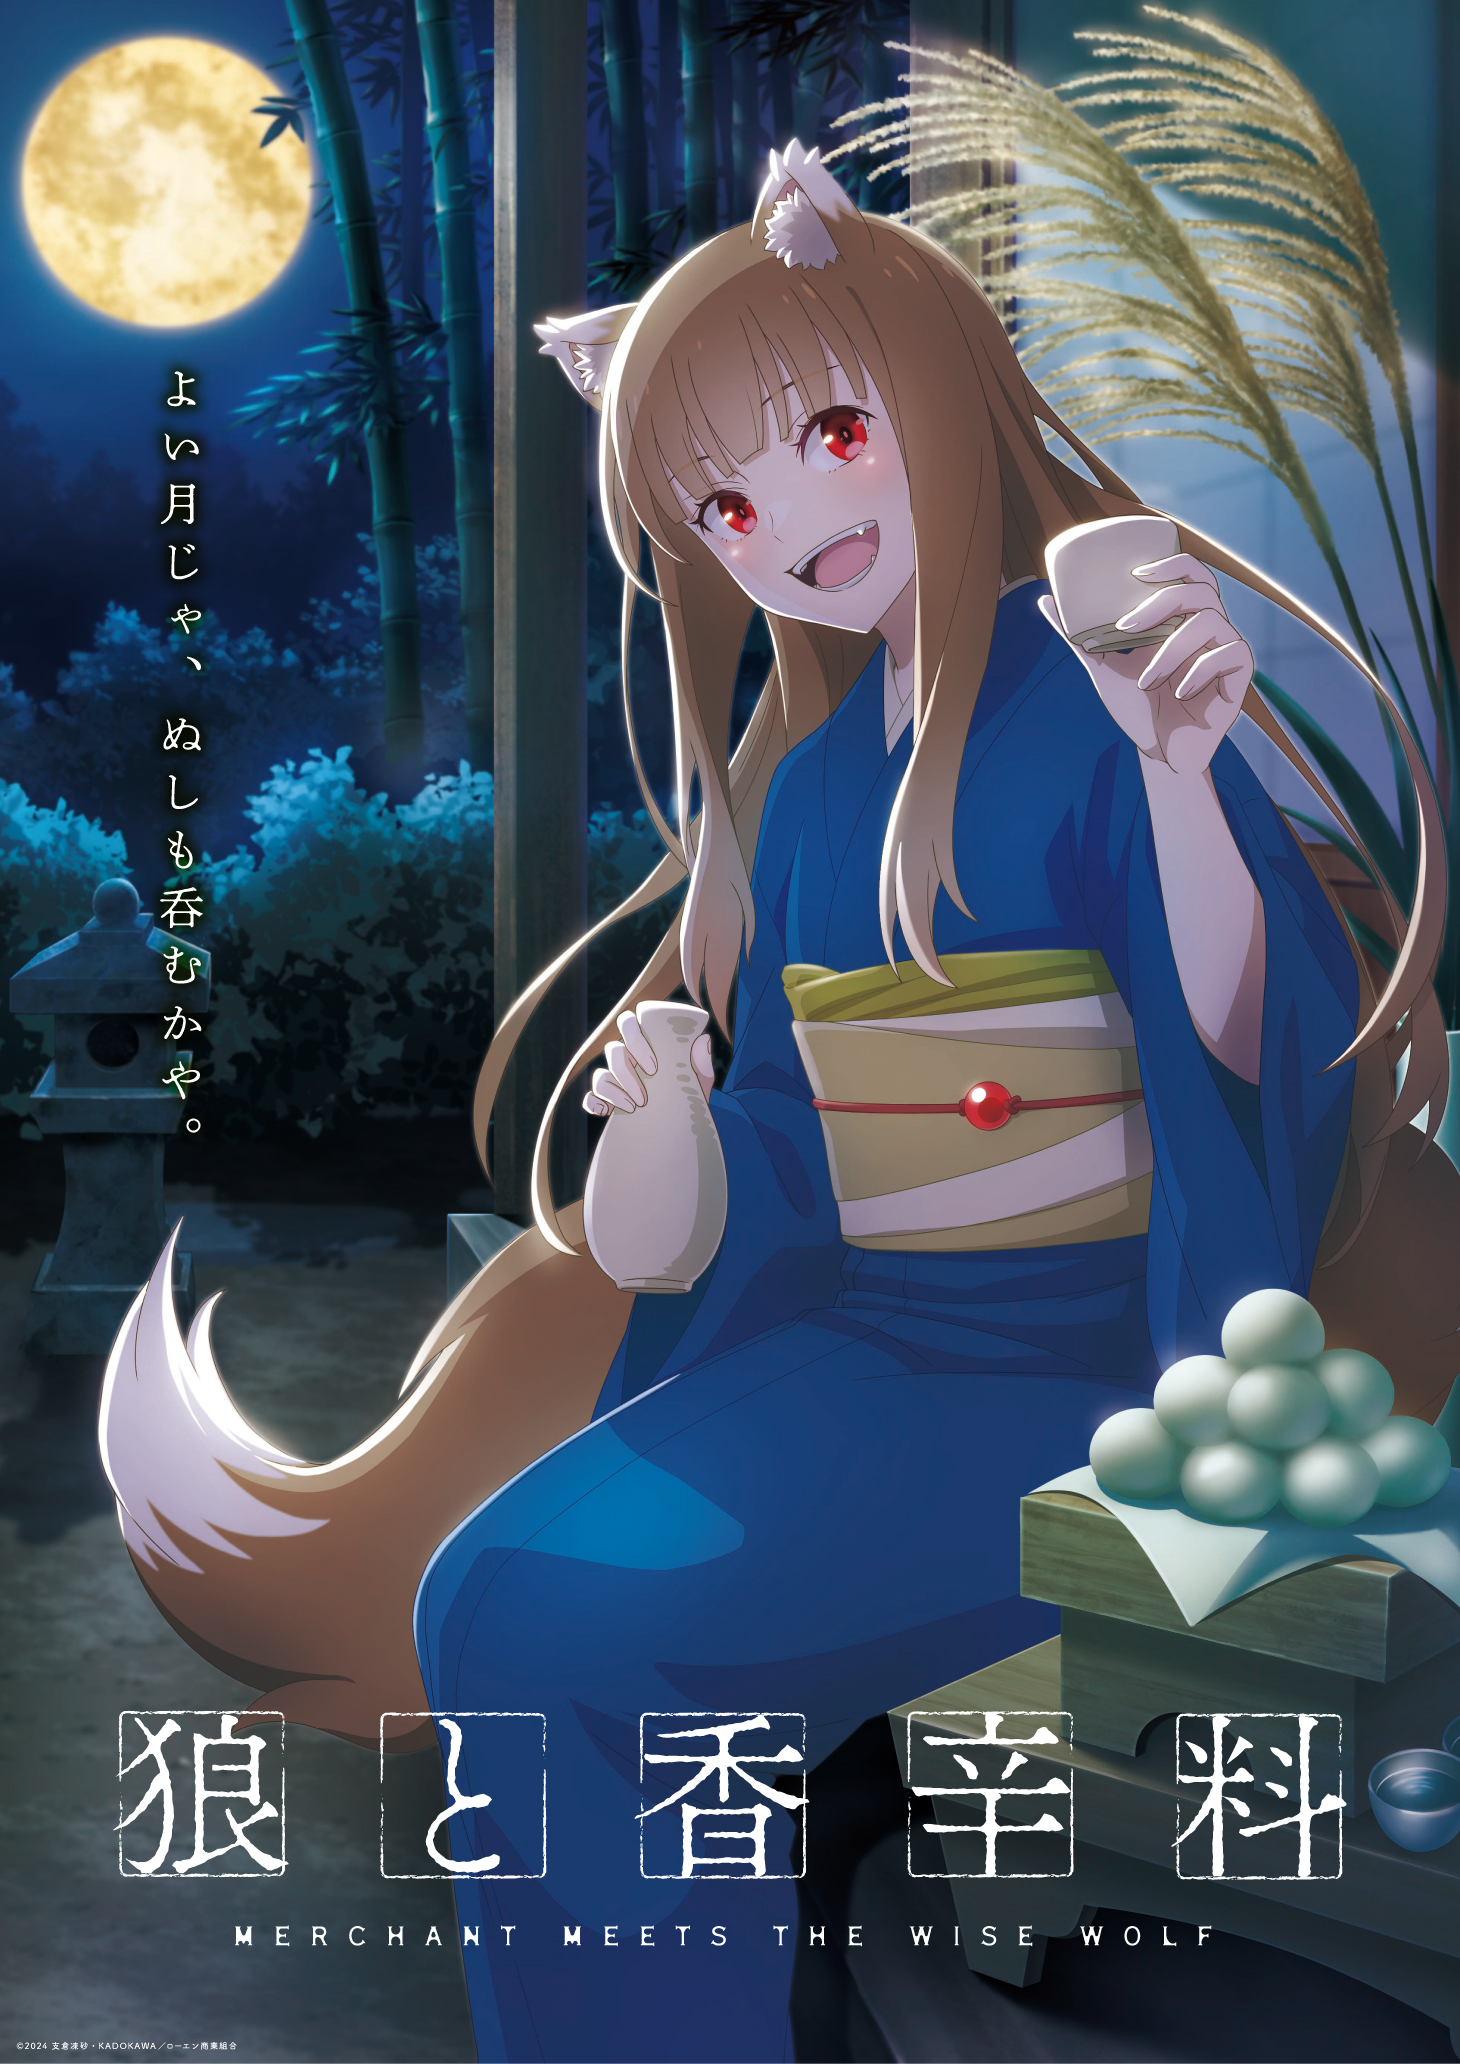 Spice and Wolf (Anime) Wallpapers (52+ images inside)